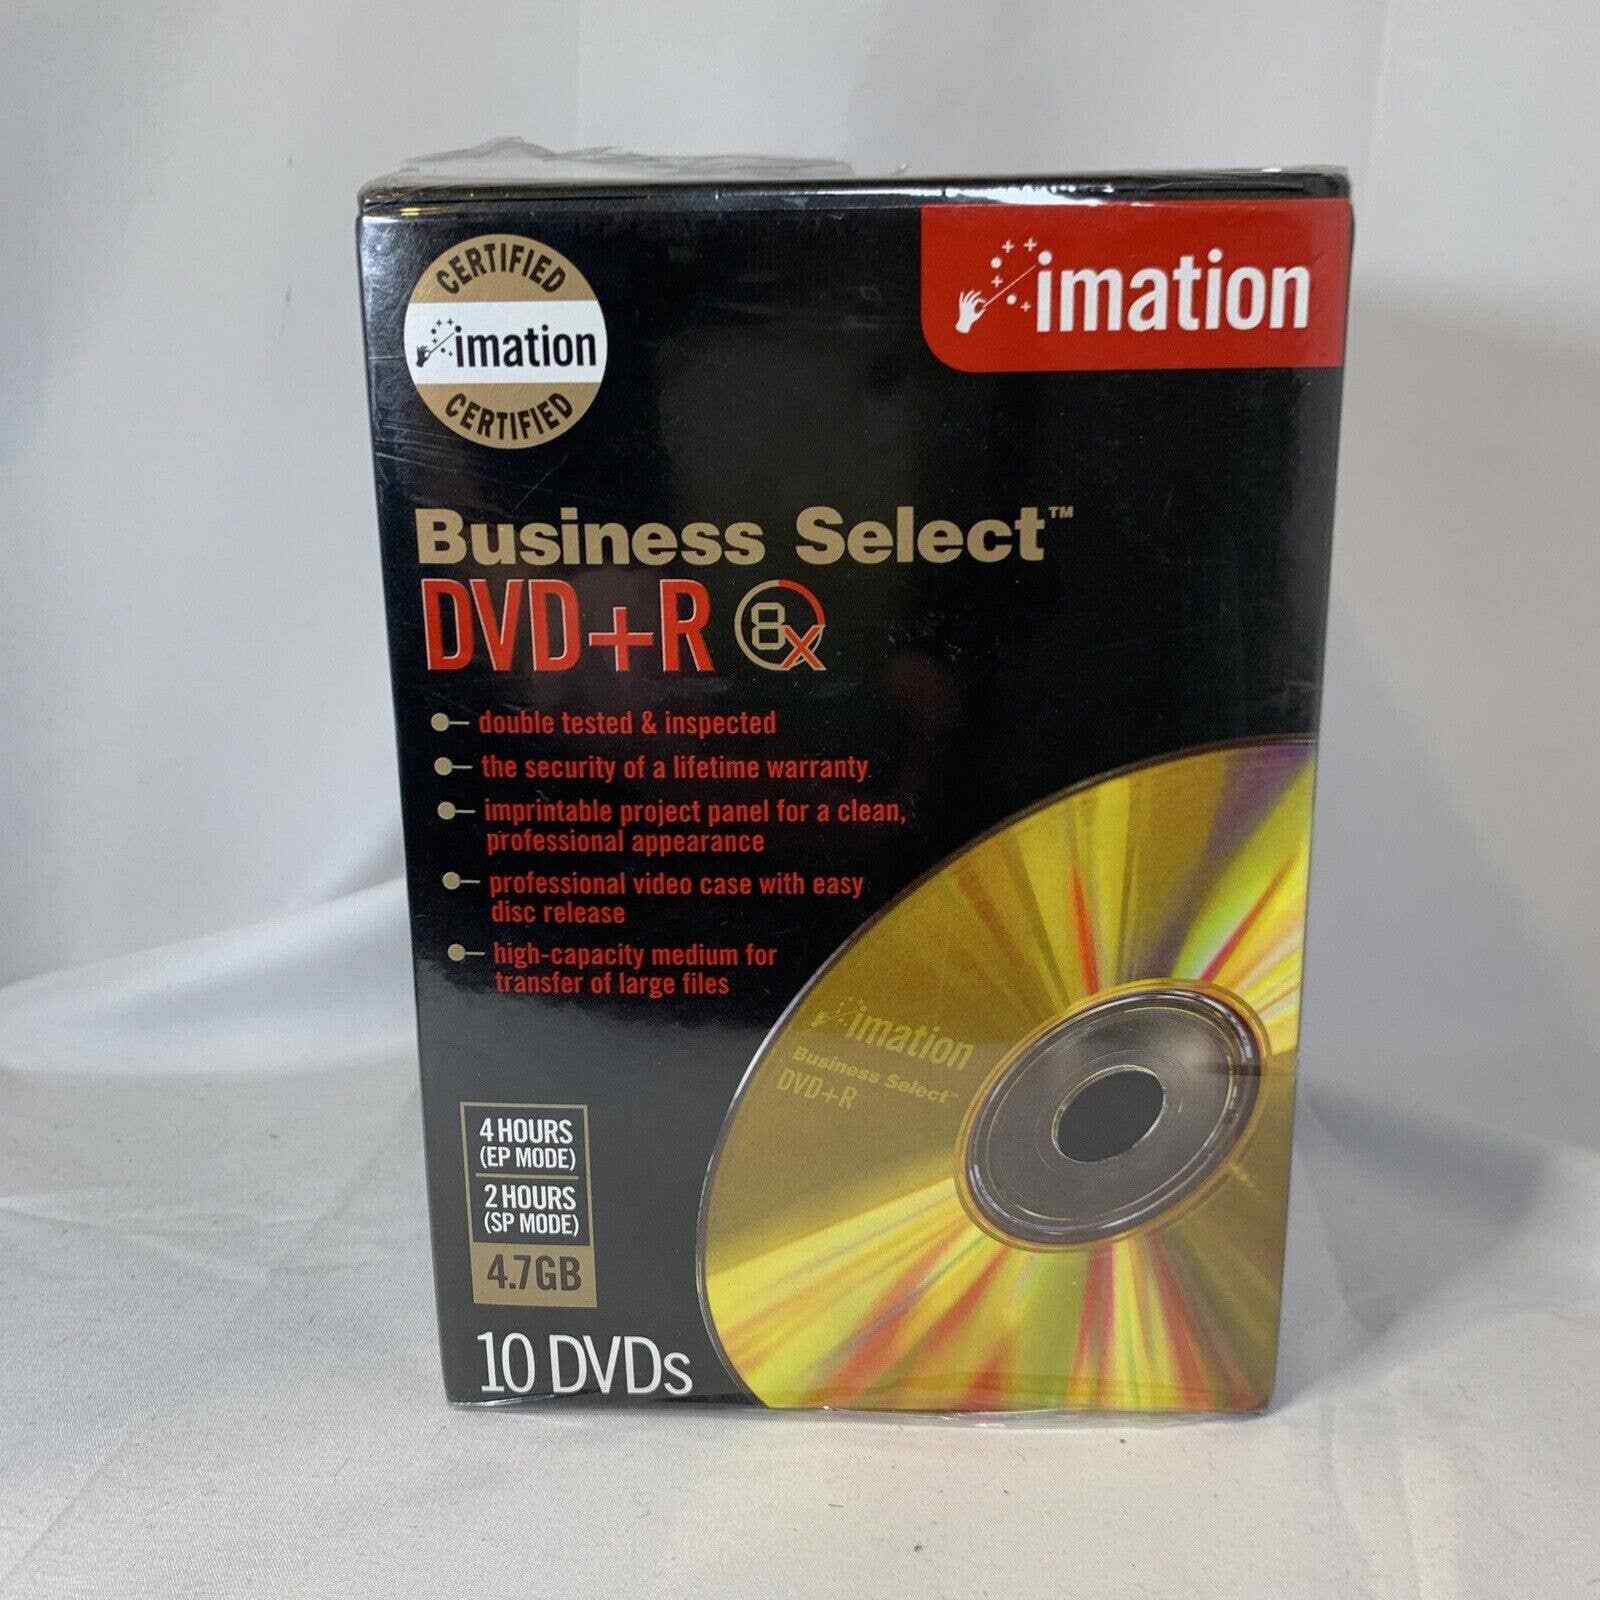 Imation Busines Select DVD+R - 10 DVD's plus video cases 4.7GB